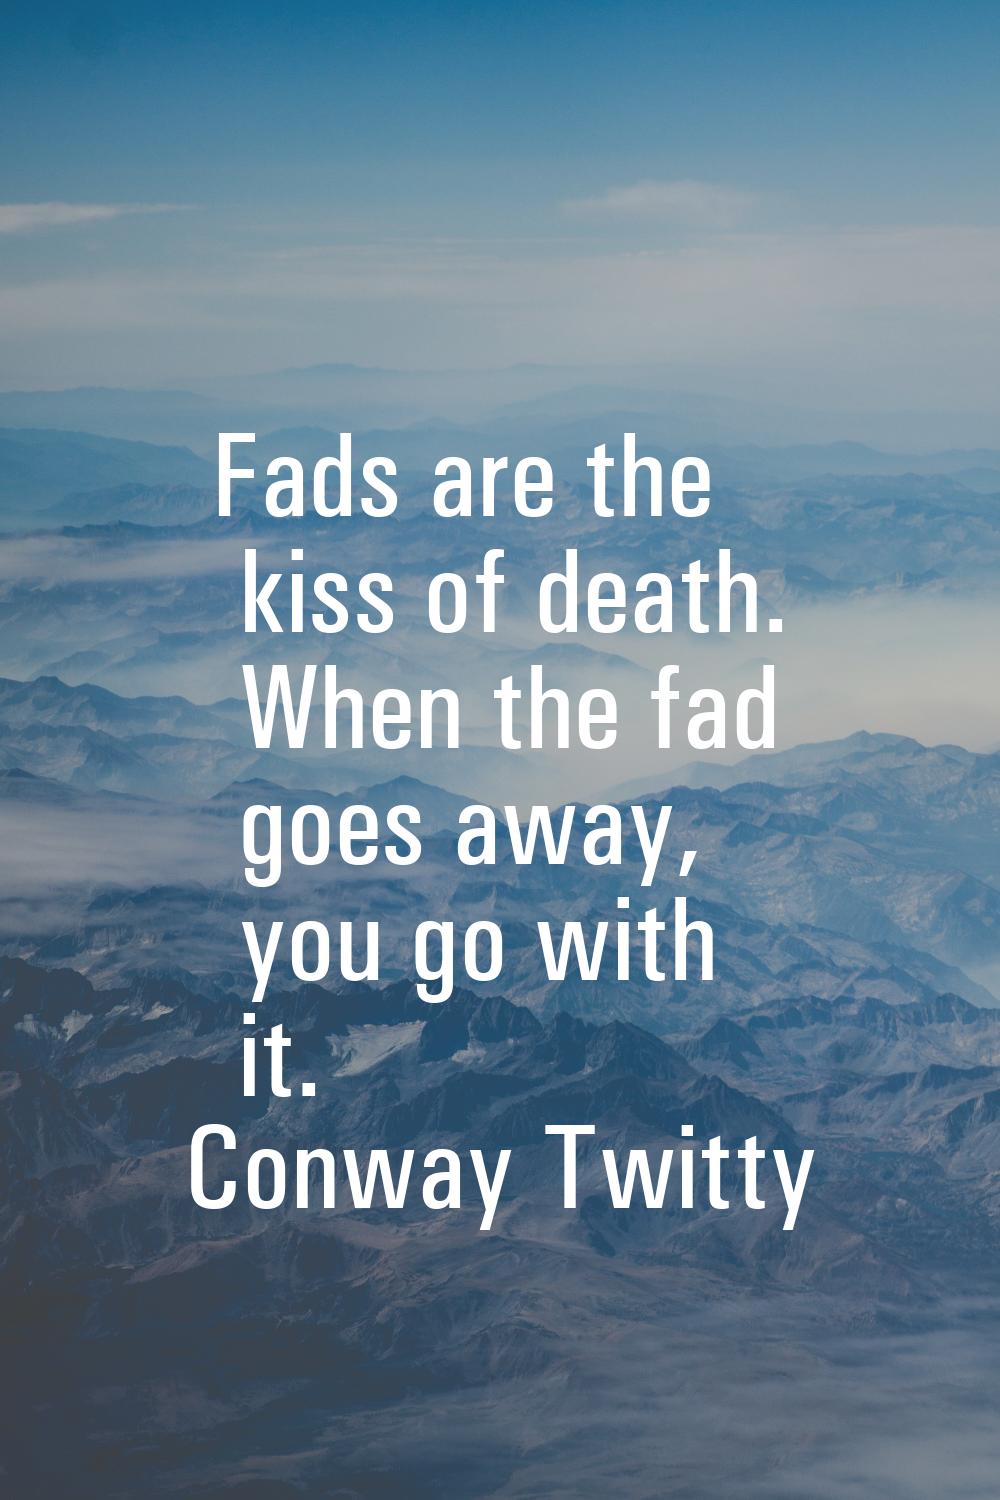 Fads are the kiss of death. When the fad goes away, you go with it.